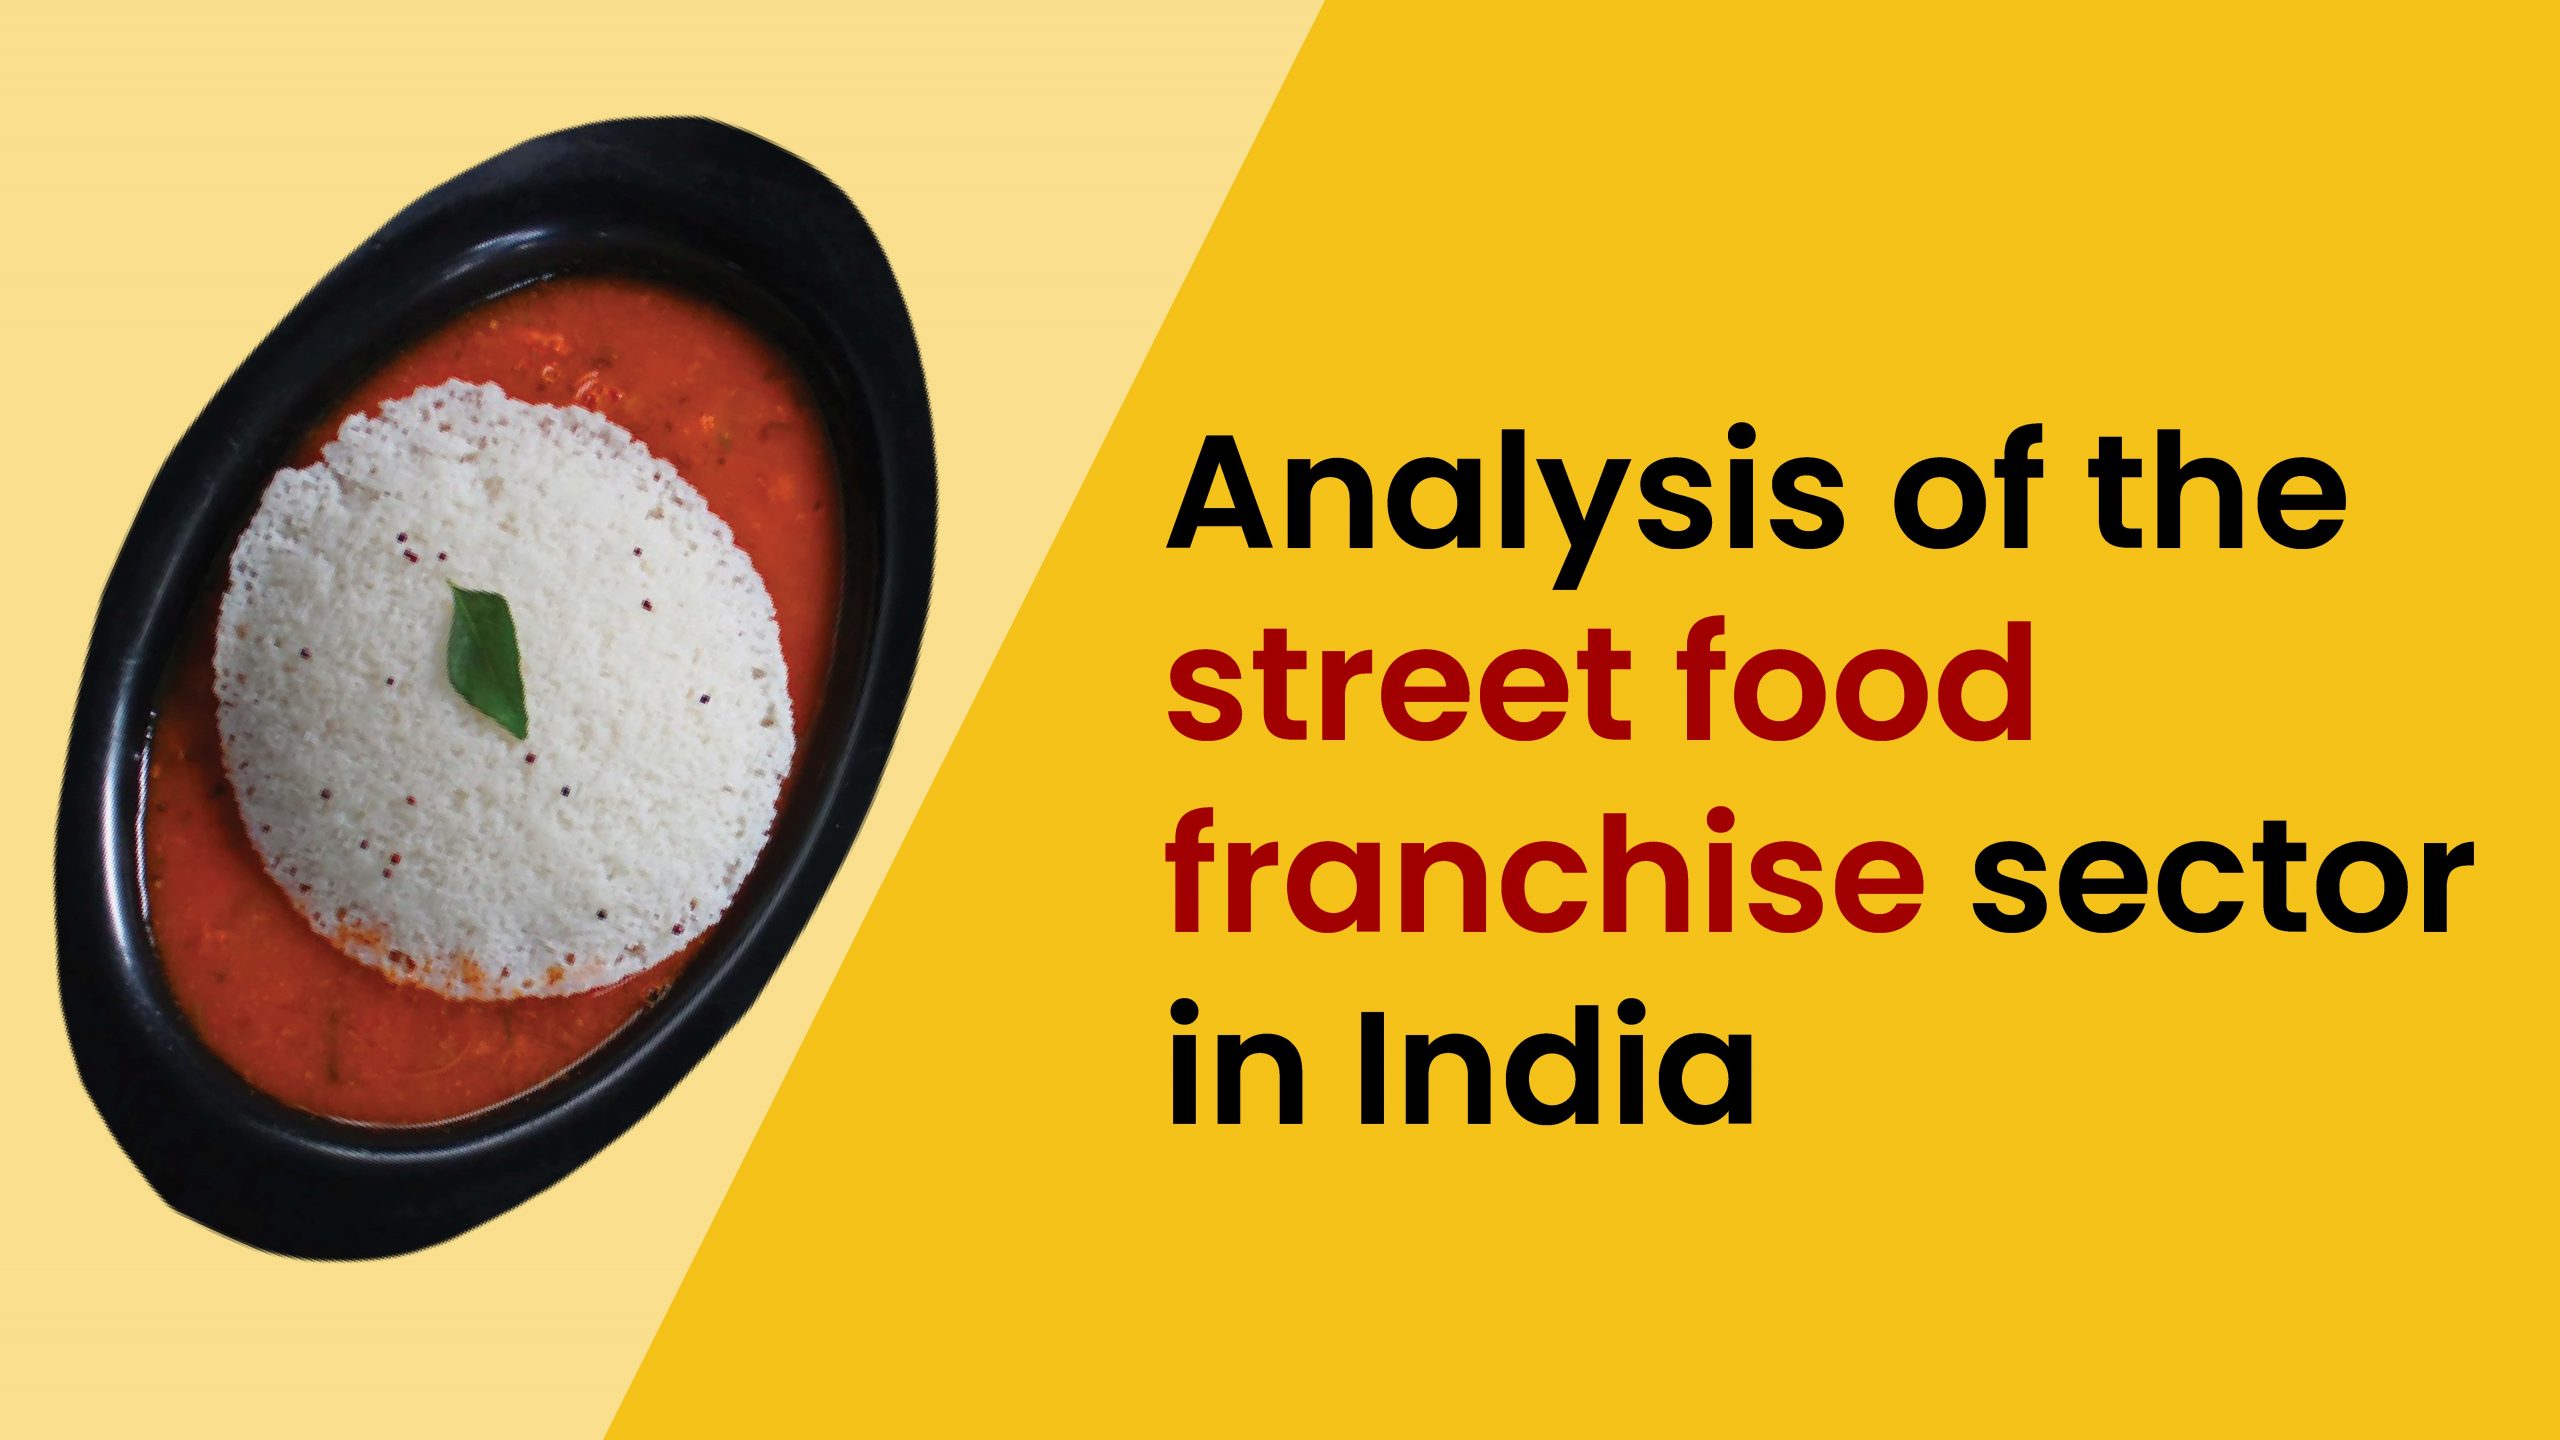 Analysis of the street food franchise sector in India